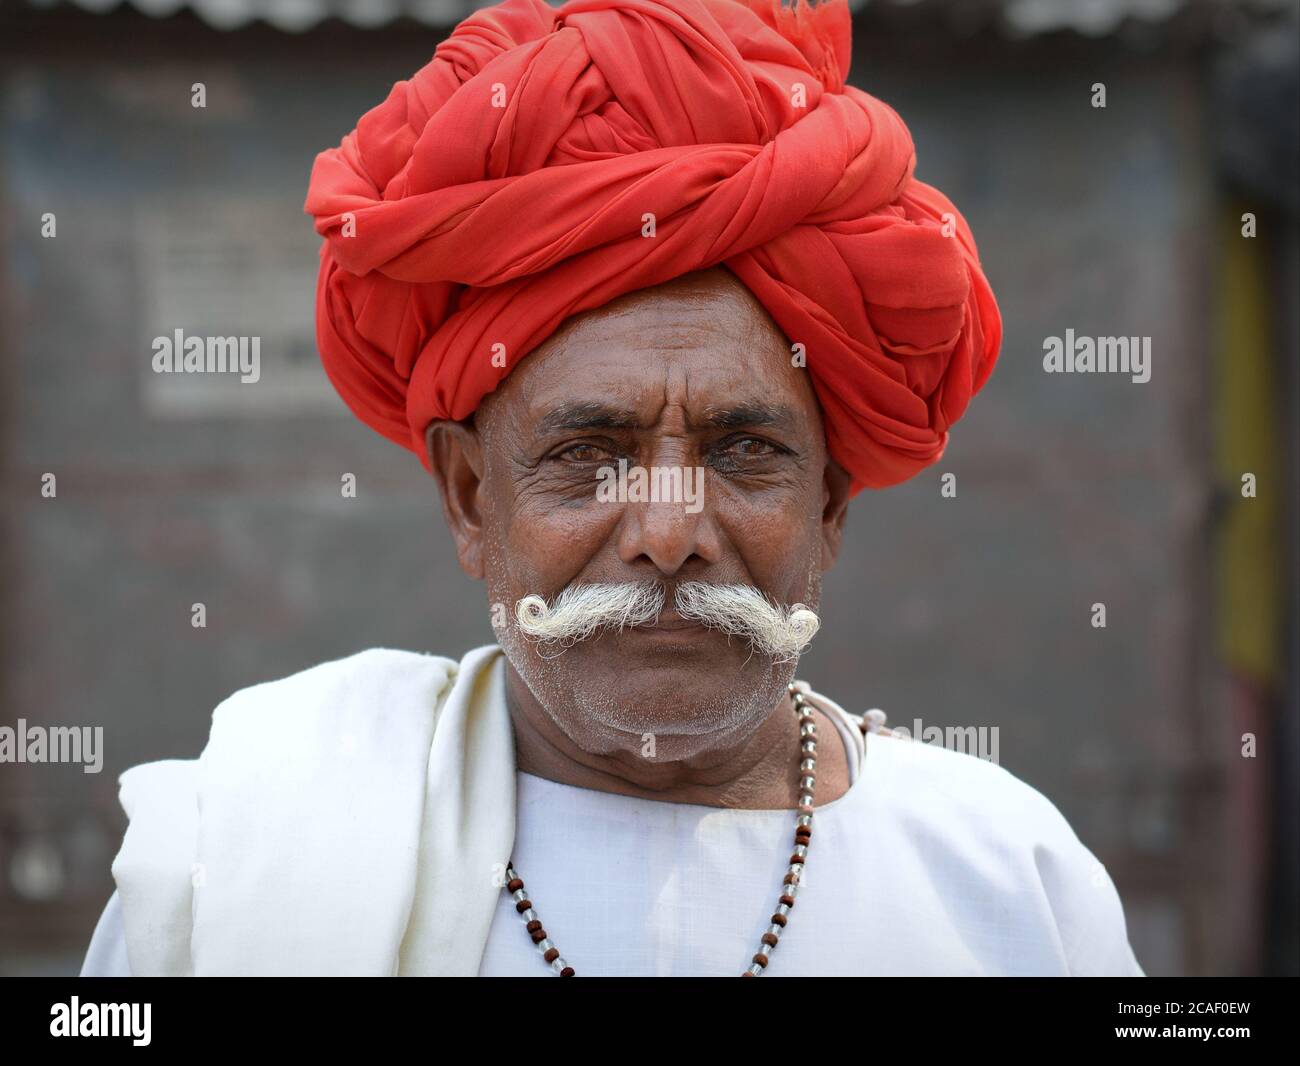 Elderly Indian Rajasthani man with red turban and big moustache poses for the camera. Stock Photo